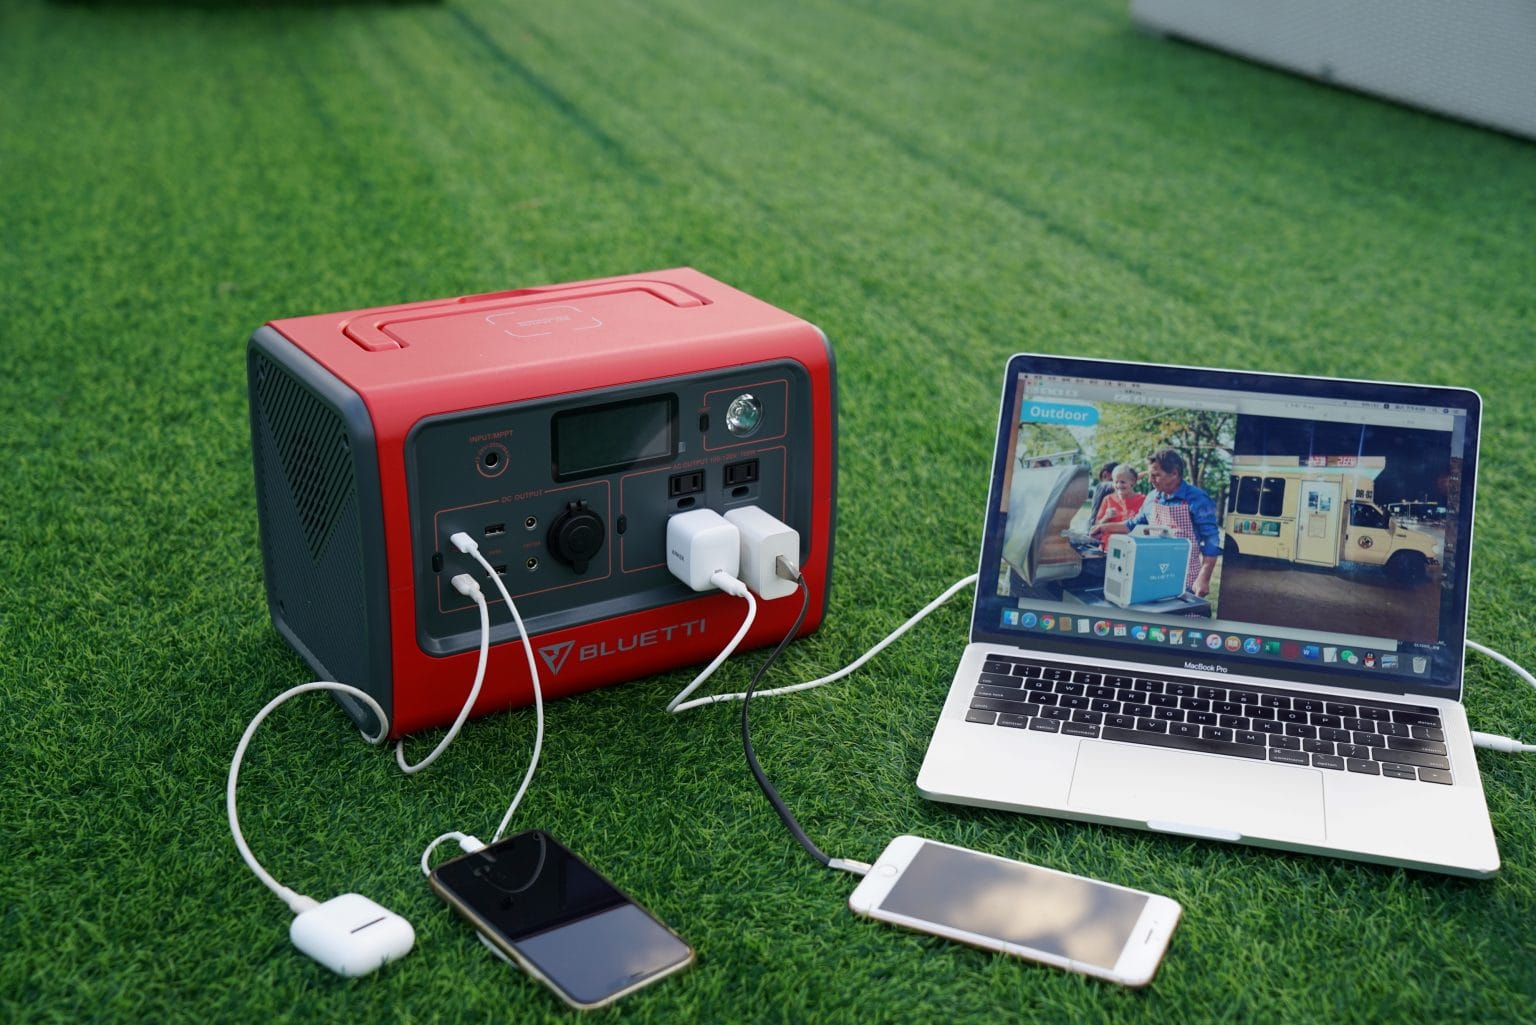 With the Bluetti EB70 Portable Power Station, your devices will be charged no matter what happens.